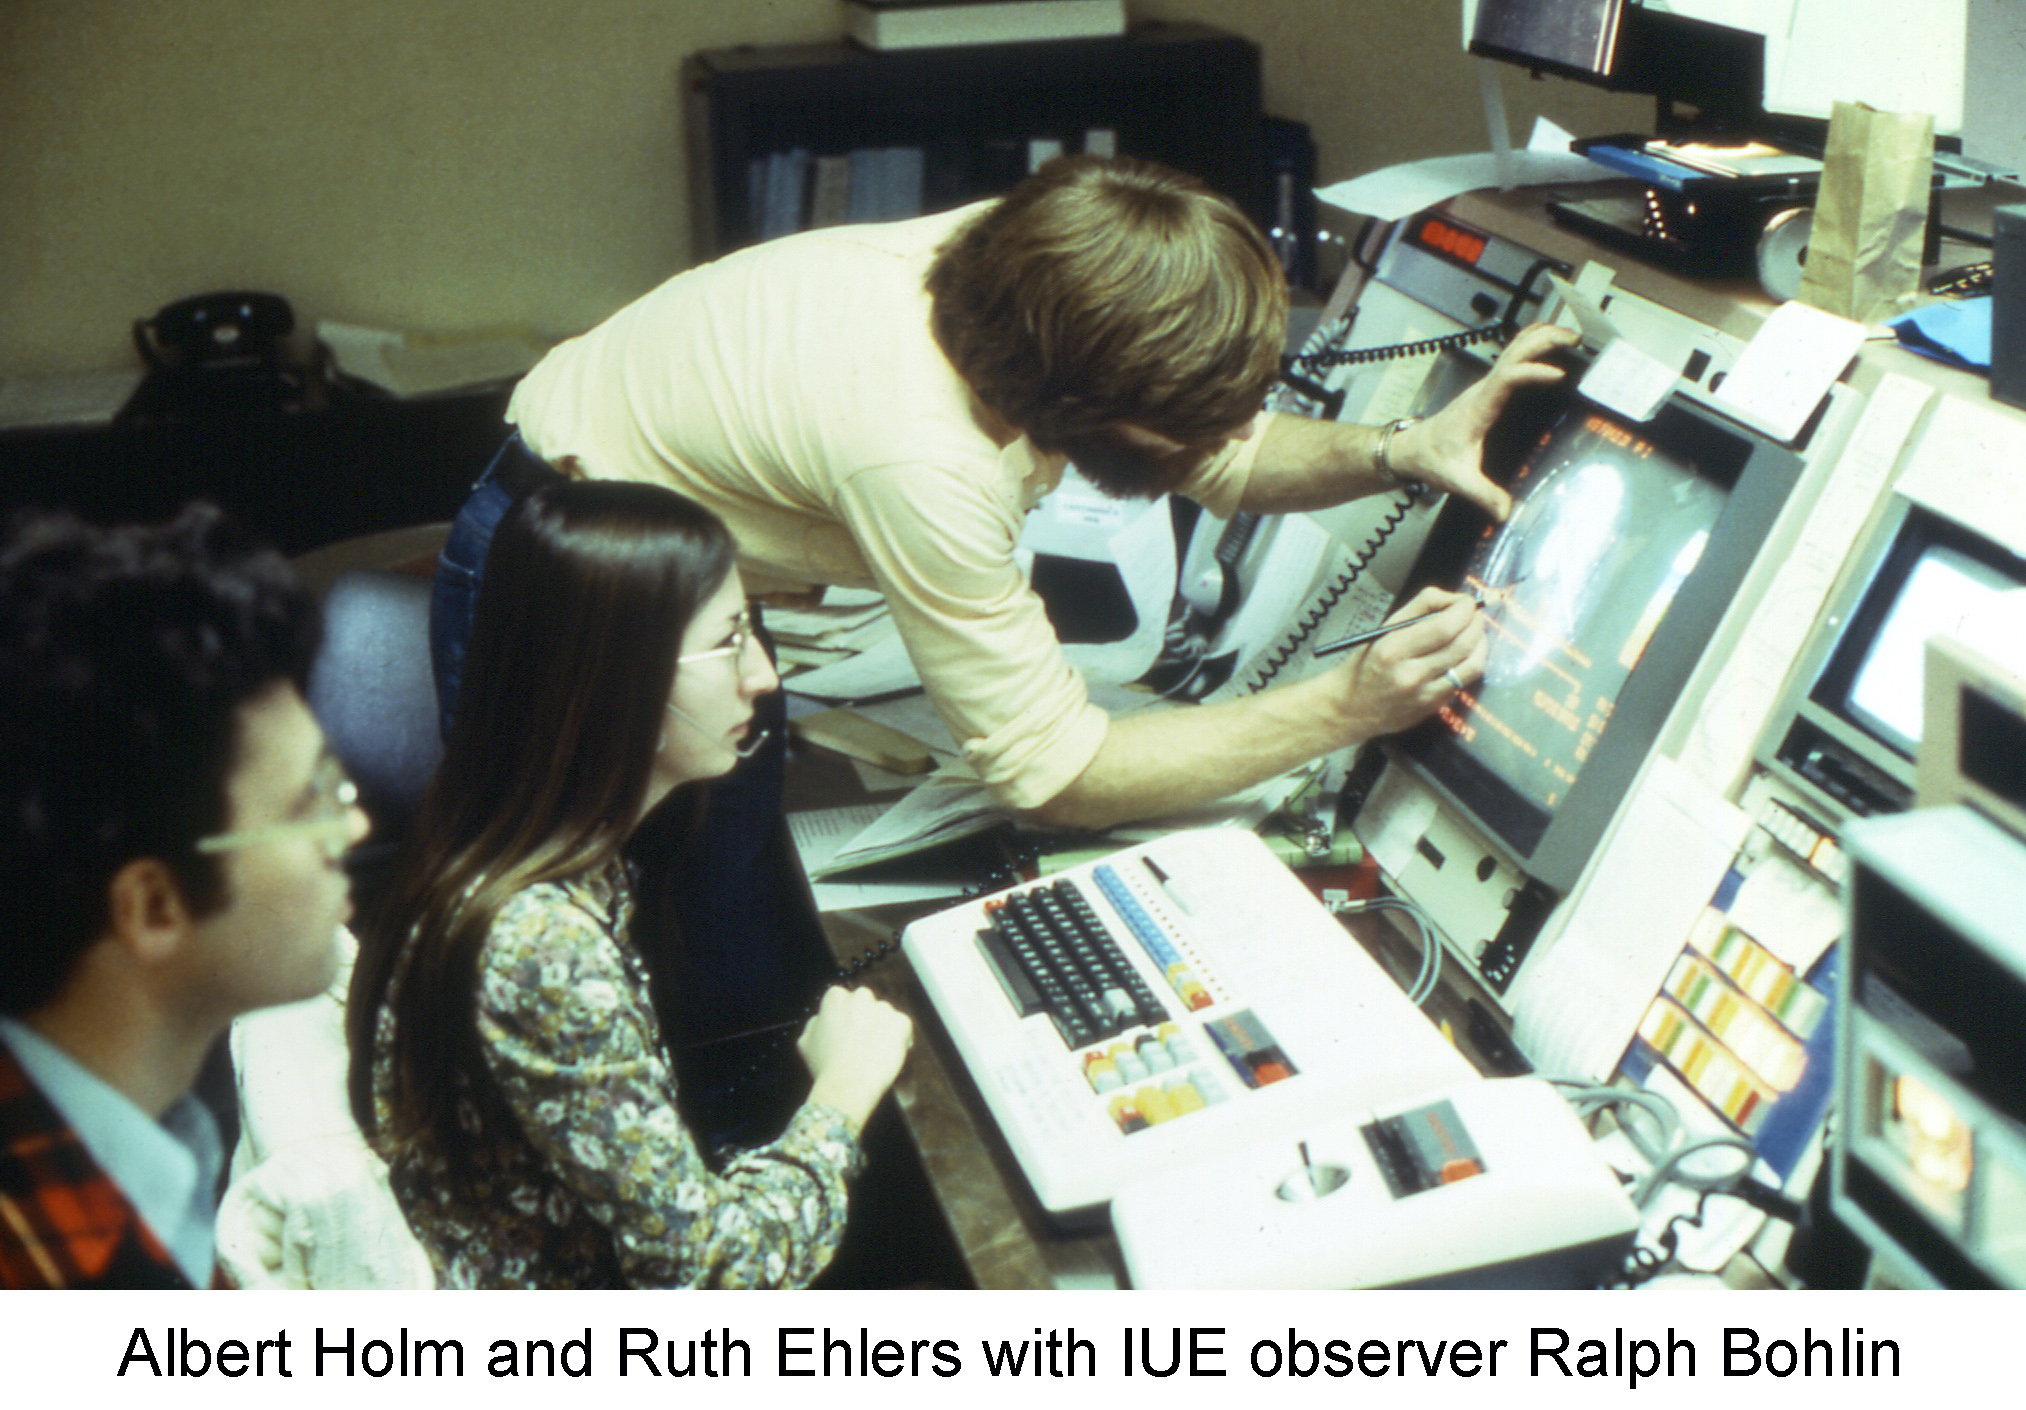 Al Holm, Ruth Ehlers, and Ralph Bohlin at work at the Experiment Display System